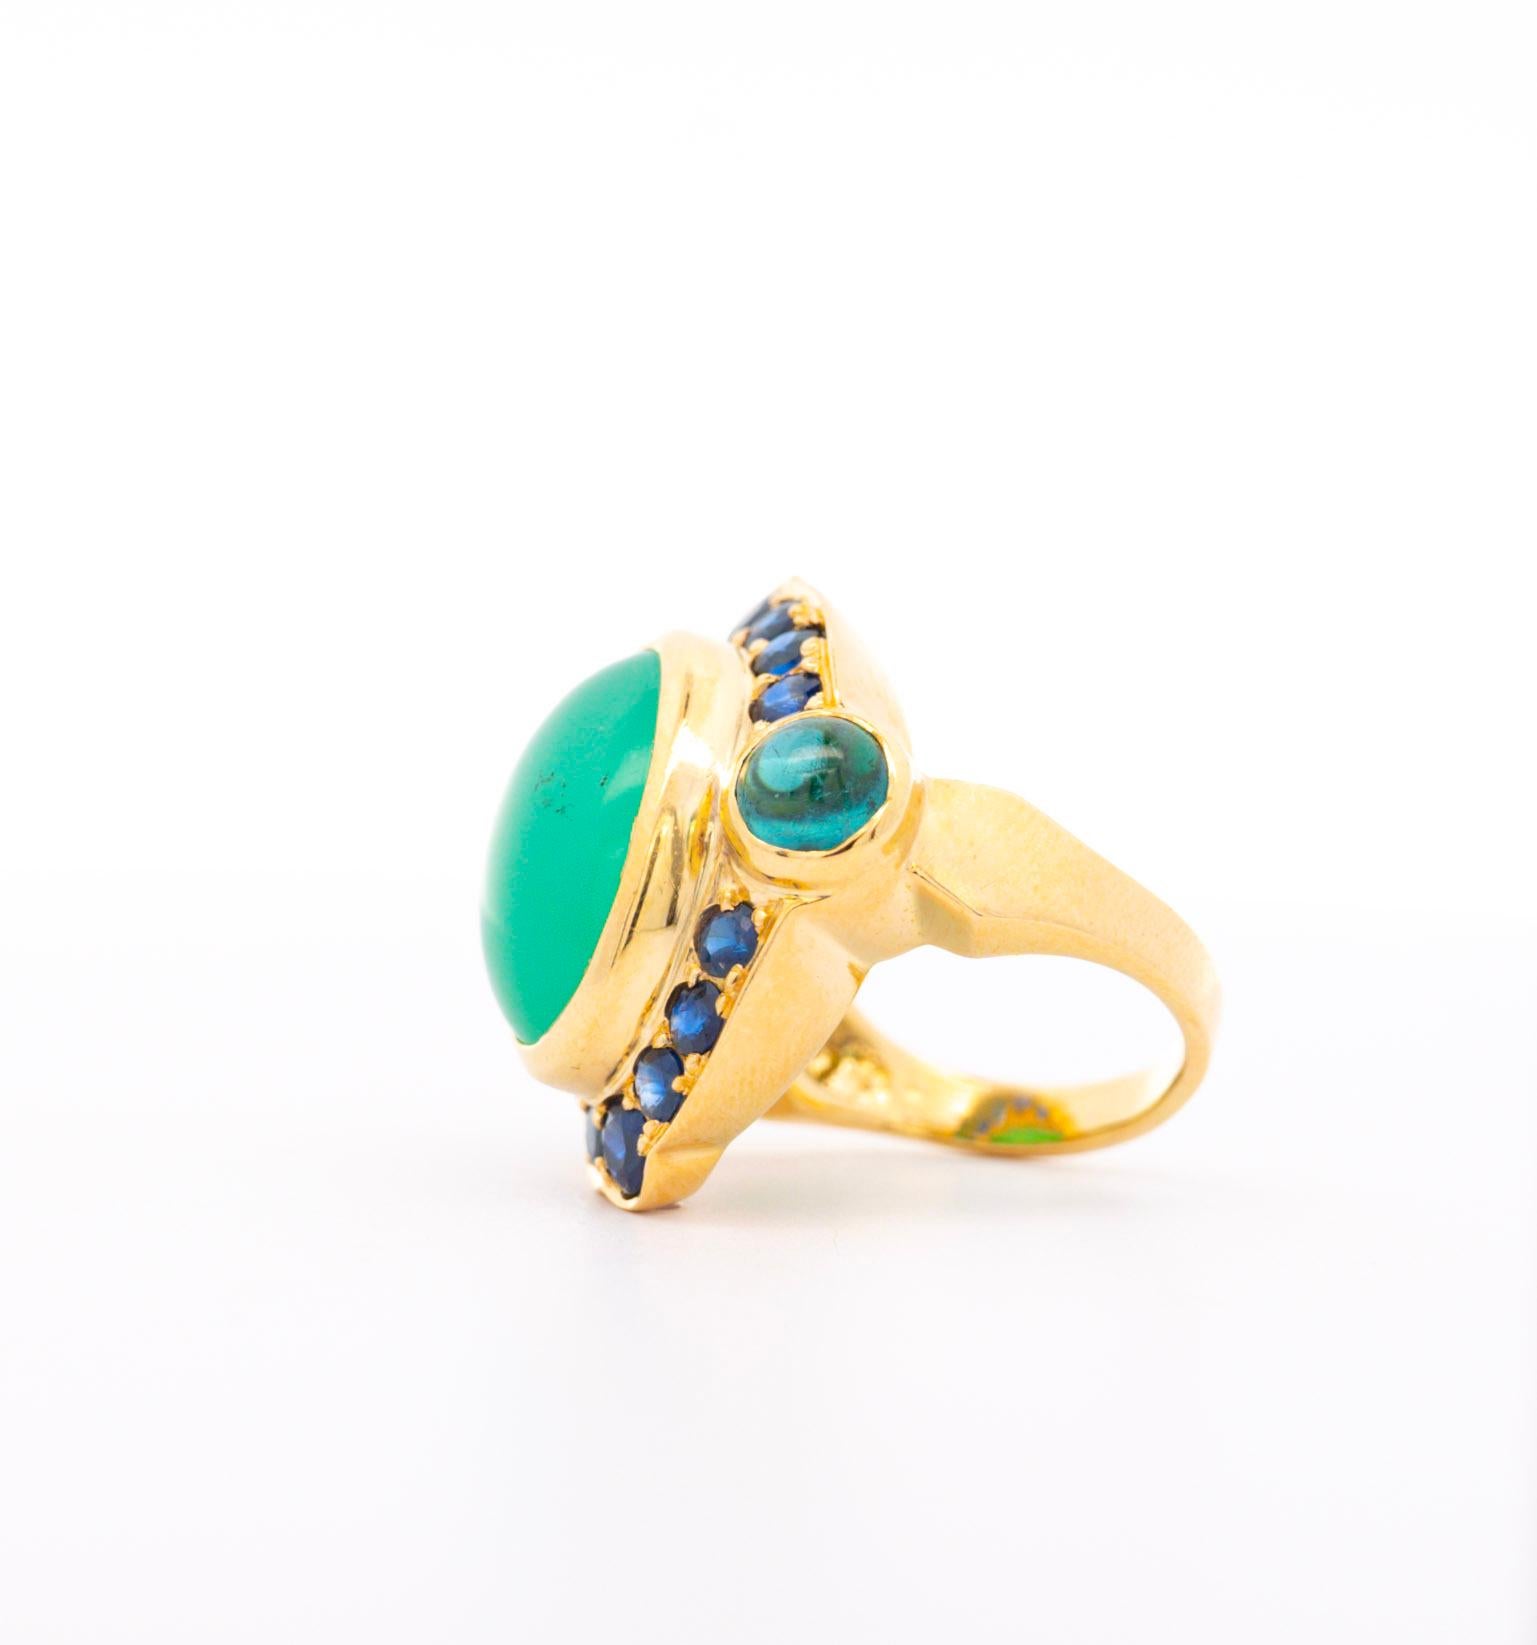 Vintage Chalcedony Quartz and Sapphire Ring in 14K Yellow Gold—a timeless piece that captures the charm of vintage aesthetics. This ring, weighing 13.2 grams and sized at 6, features a combination of bezel and tension settings.

The center stone is